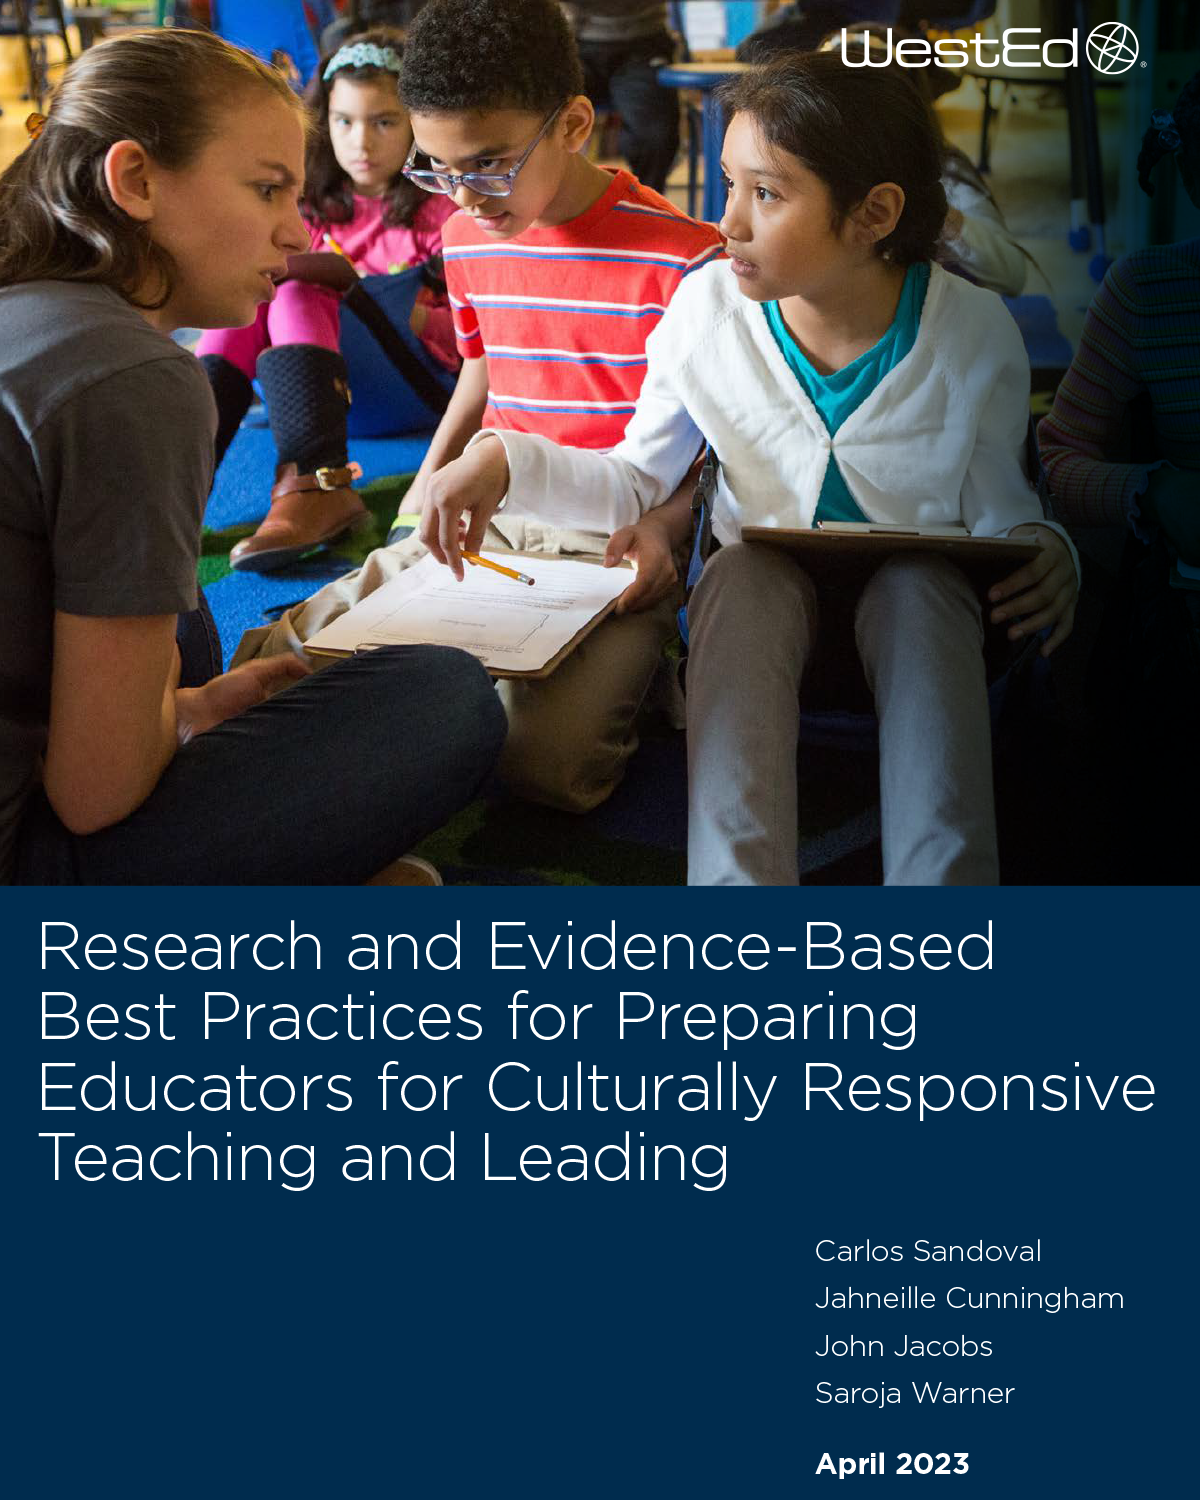 Research and Evidence-Based Best Practices for Preparing Educators for Culturally Responsive Teaching and Leading